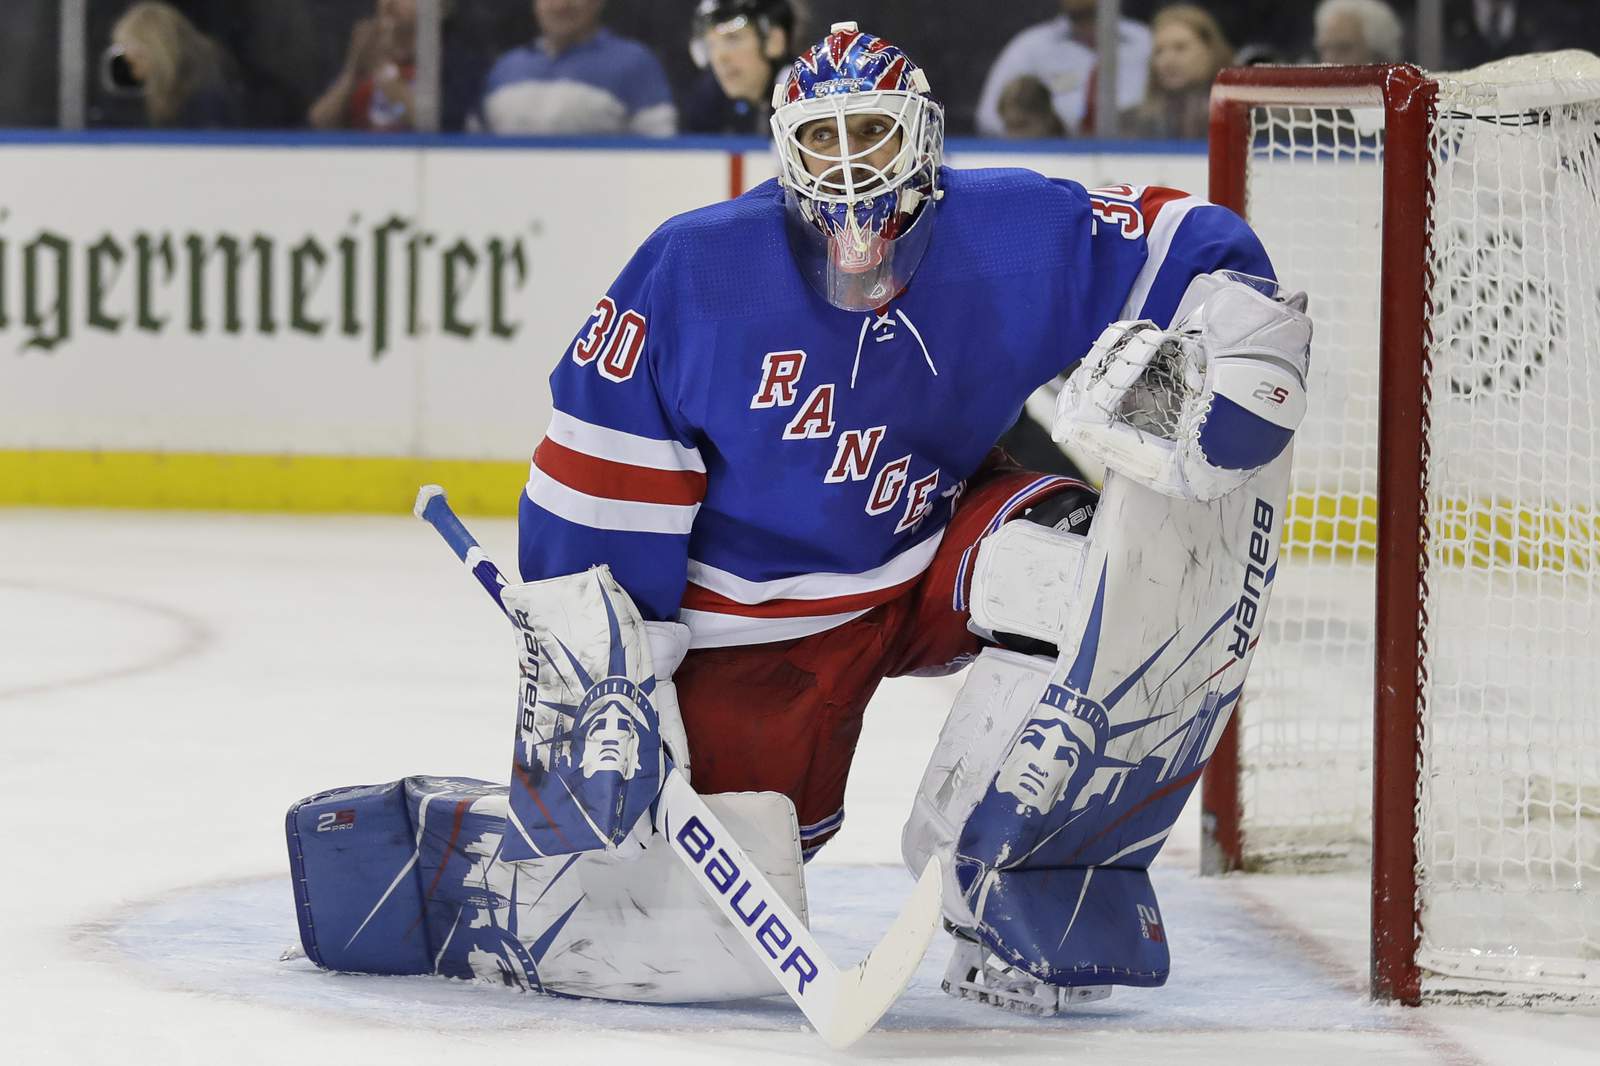 Lundqvist to Caps, goalie carousel spins in NHL free agency